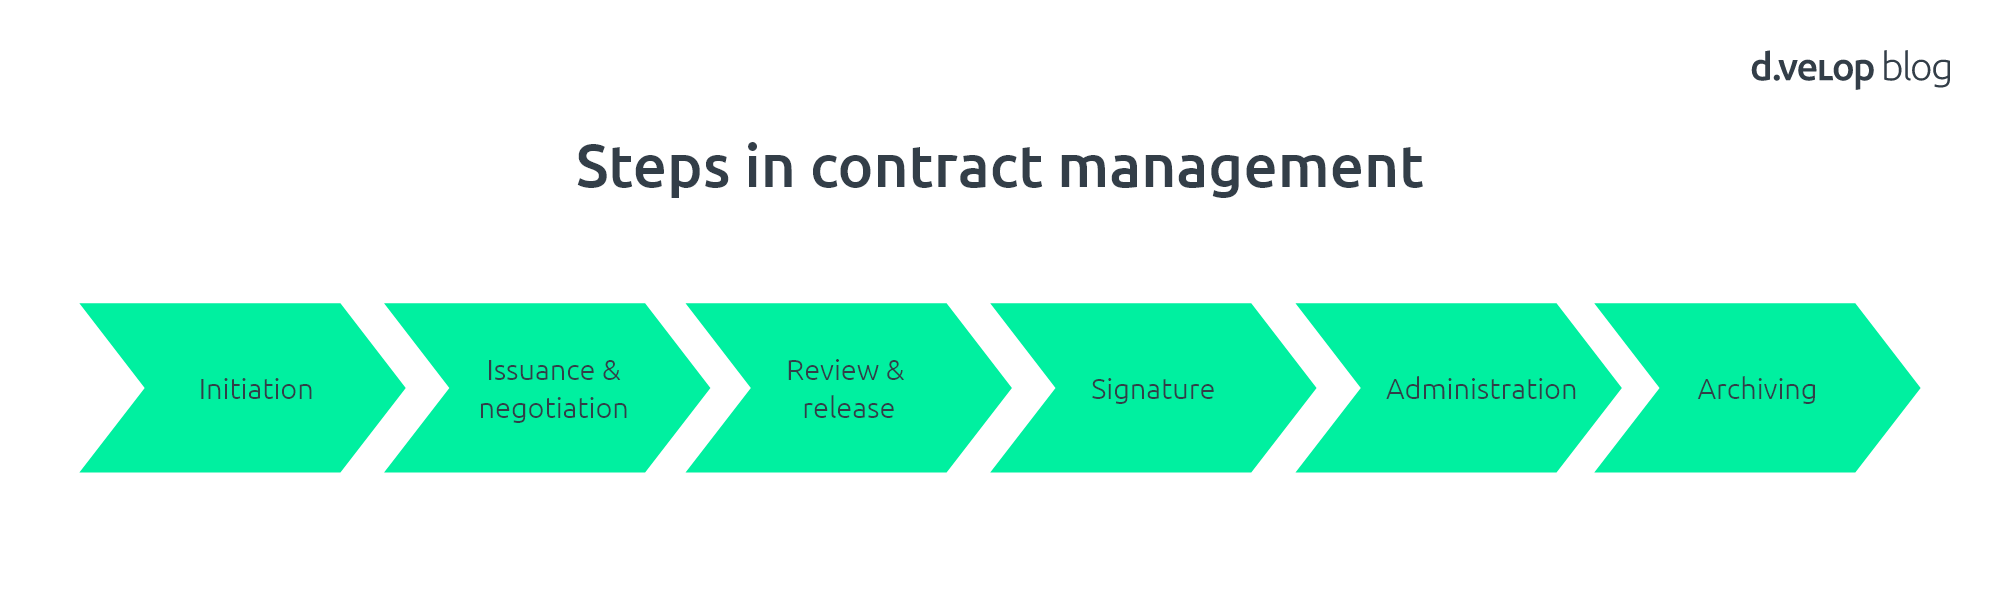 Steps in contract management